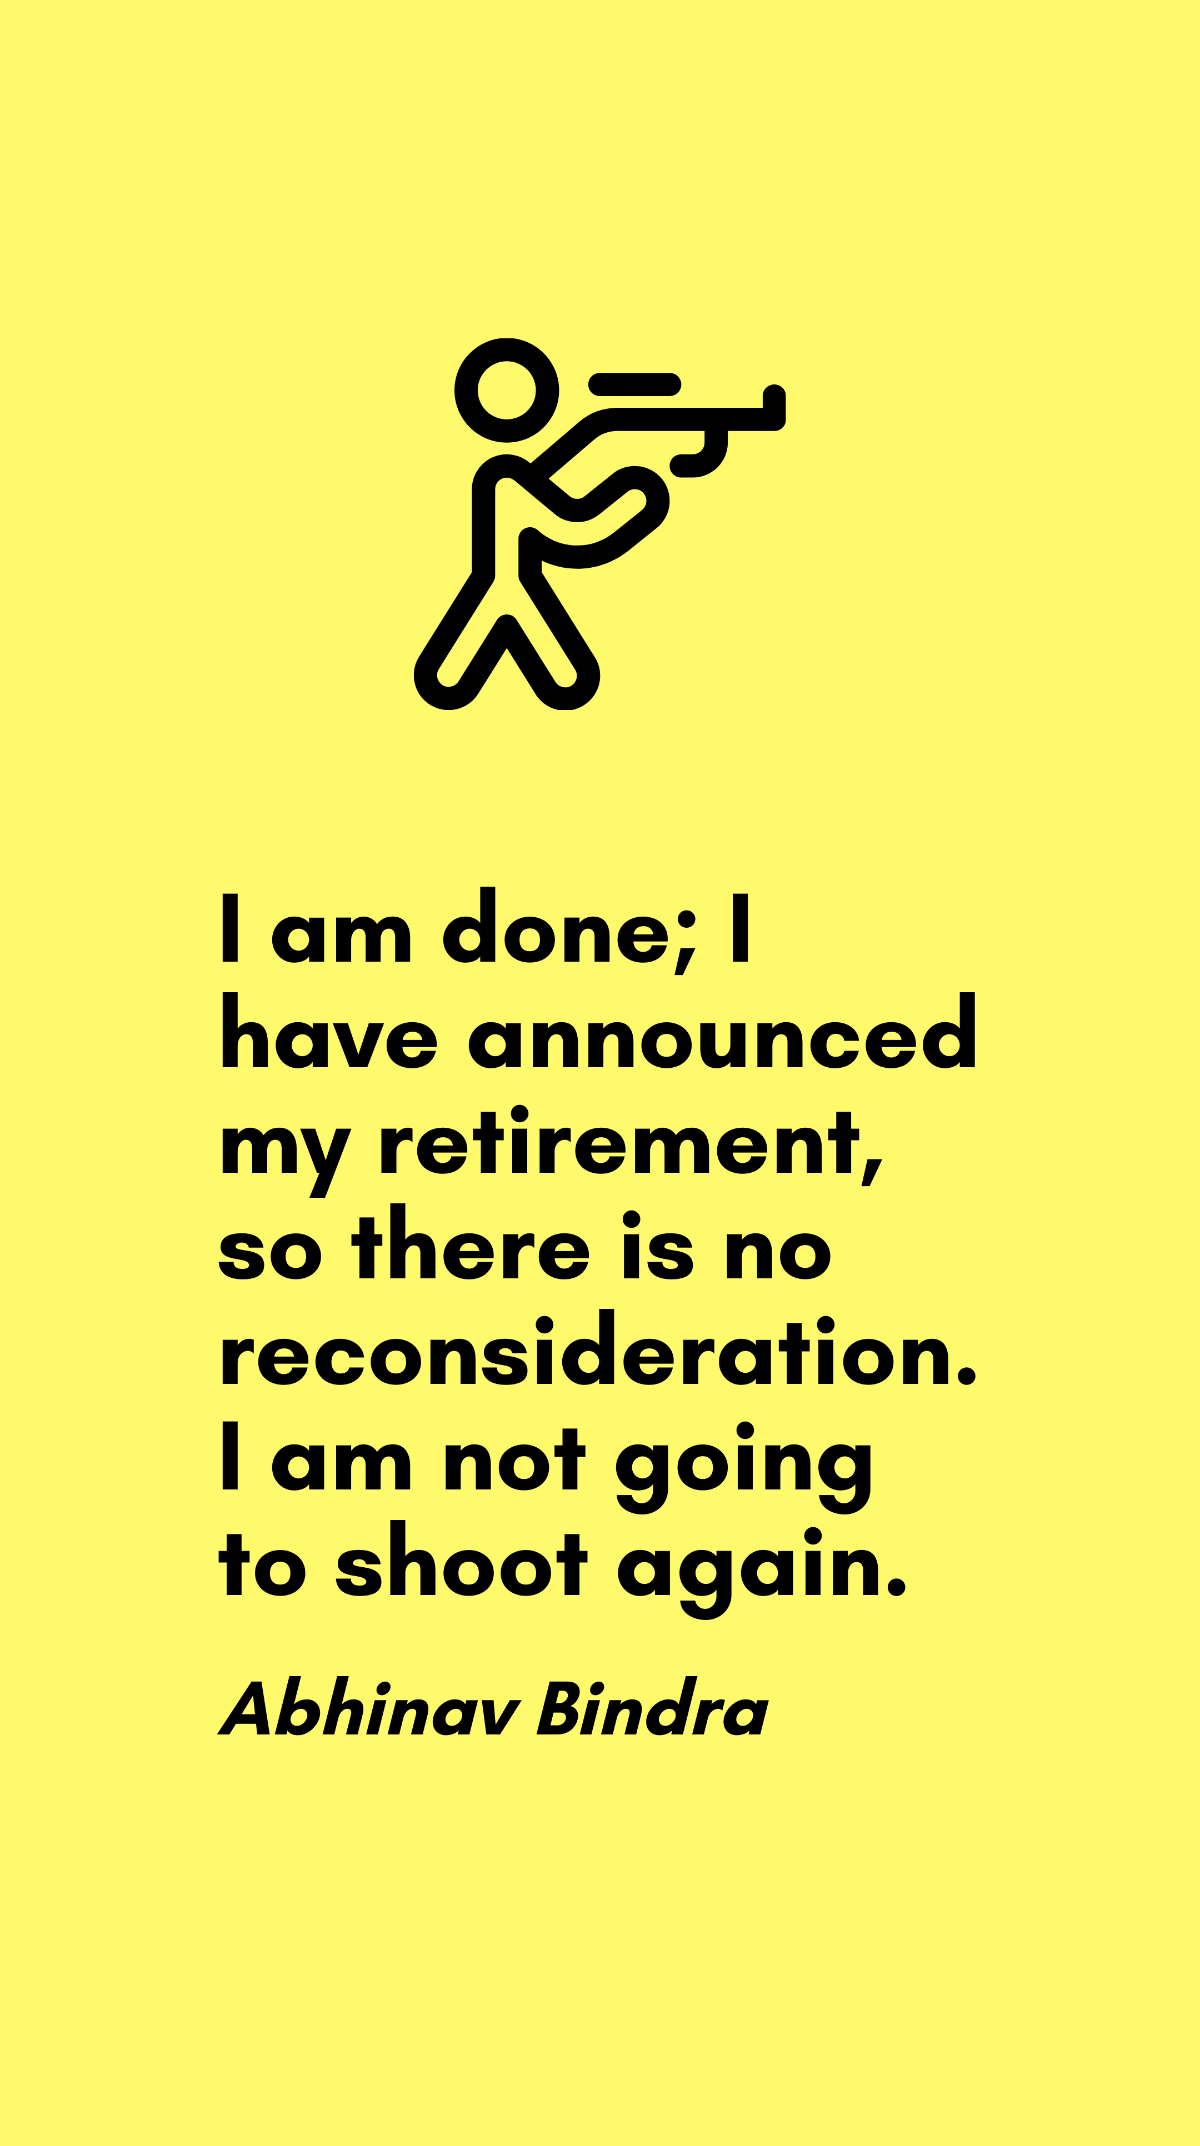 Abhinav Bindra - I am done; I have announced my retirement, so there is no reconsideration. I am not going to shoot again. Template